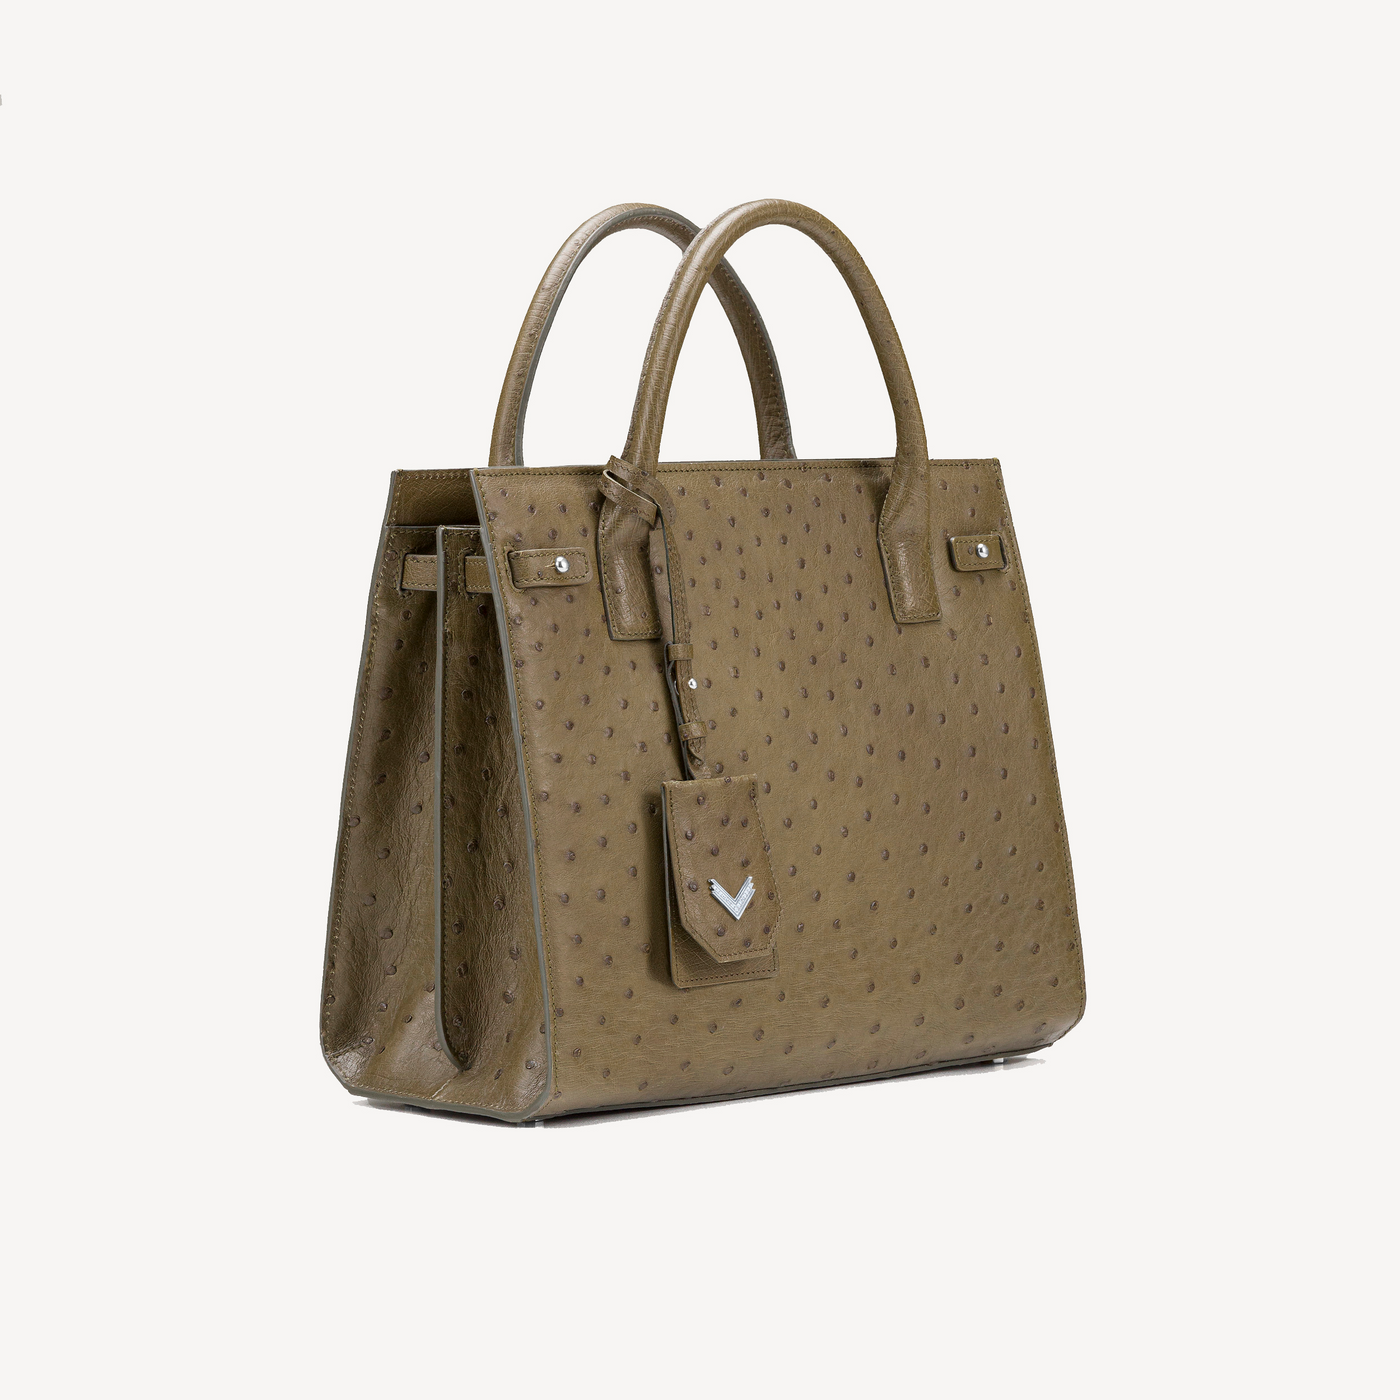 Bag, Ostrich Leather, VLogo 14K White Gold with 15 Diamonds